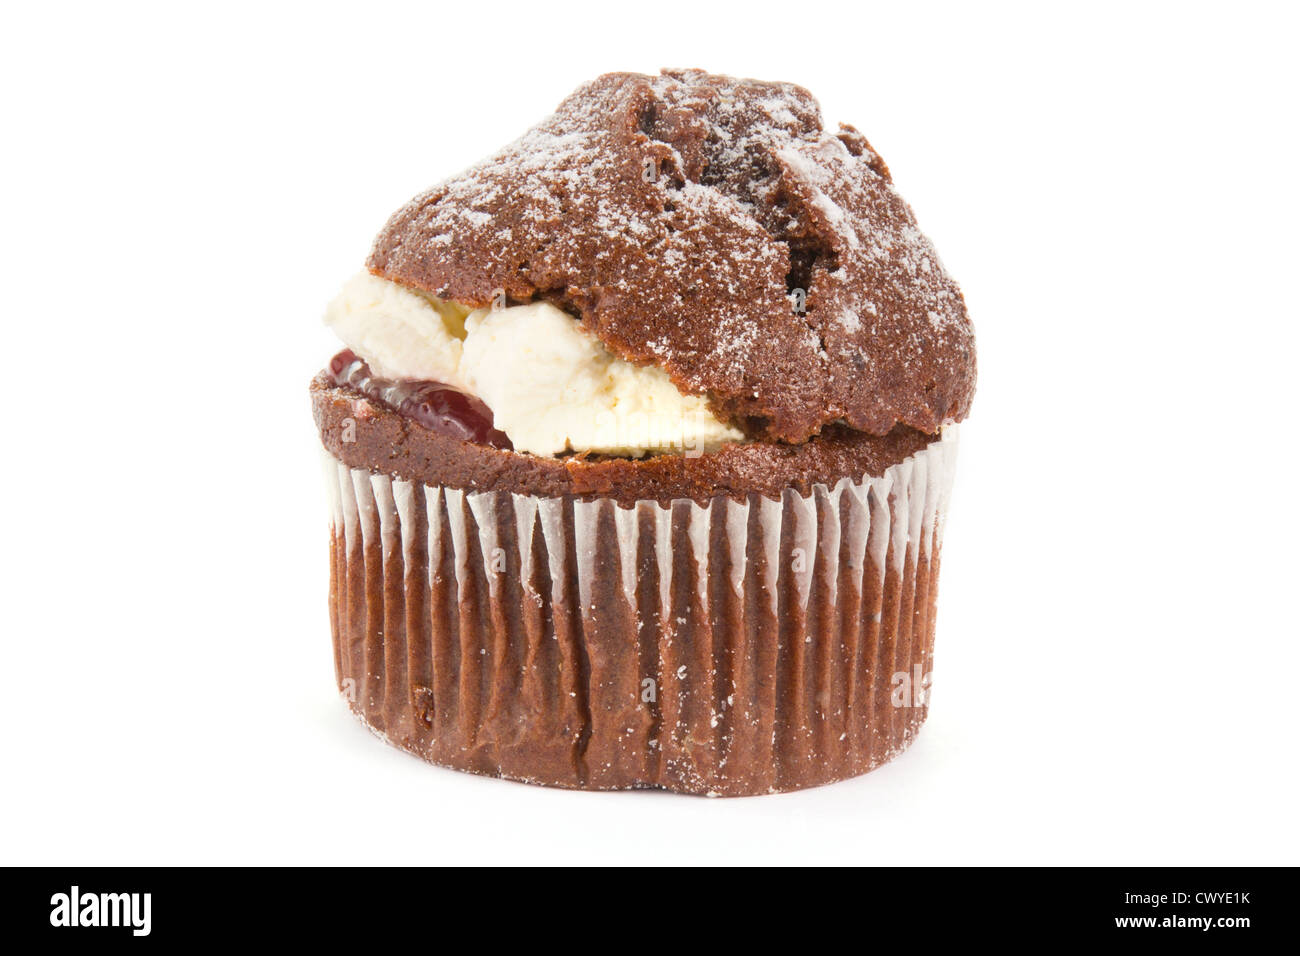 Cream filled chocolate muffin on a white background Stock Photo